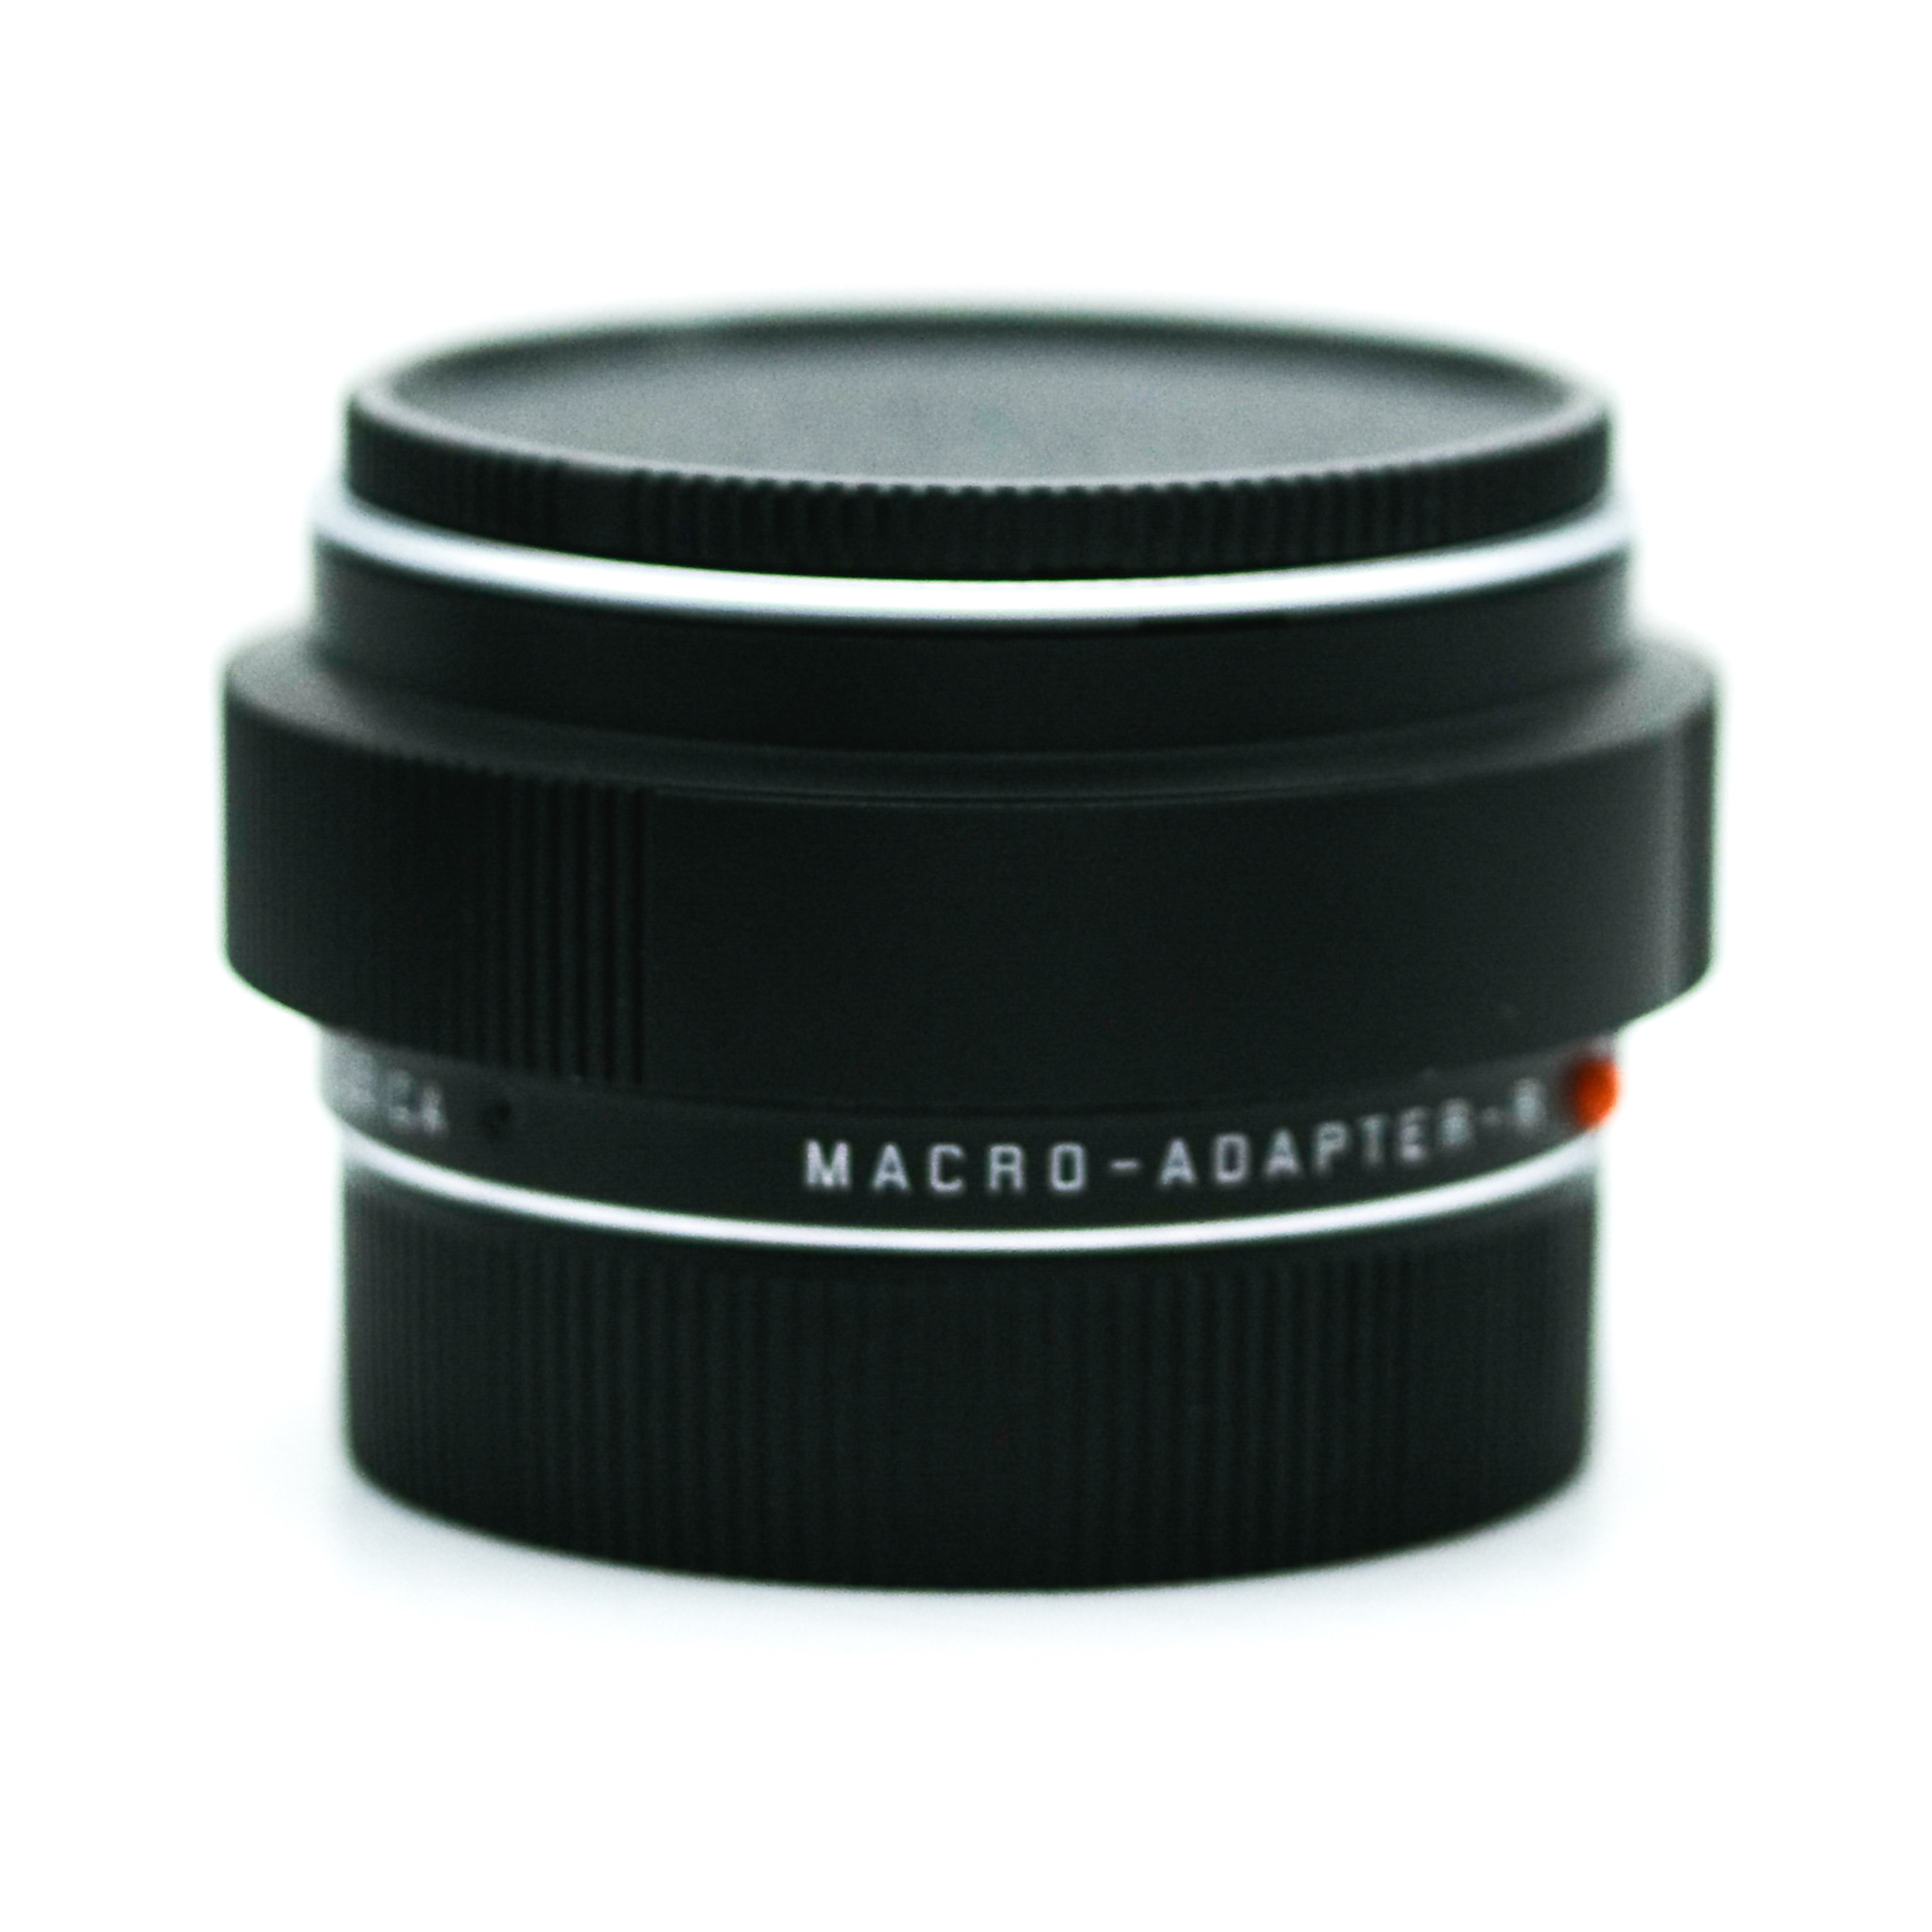 Macro-Adapter-R (14299) x1670/6 - Leica Store Manchester